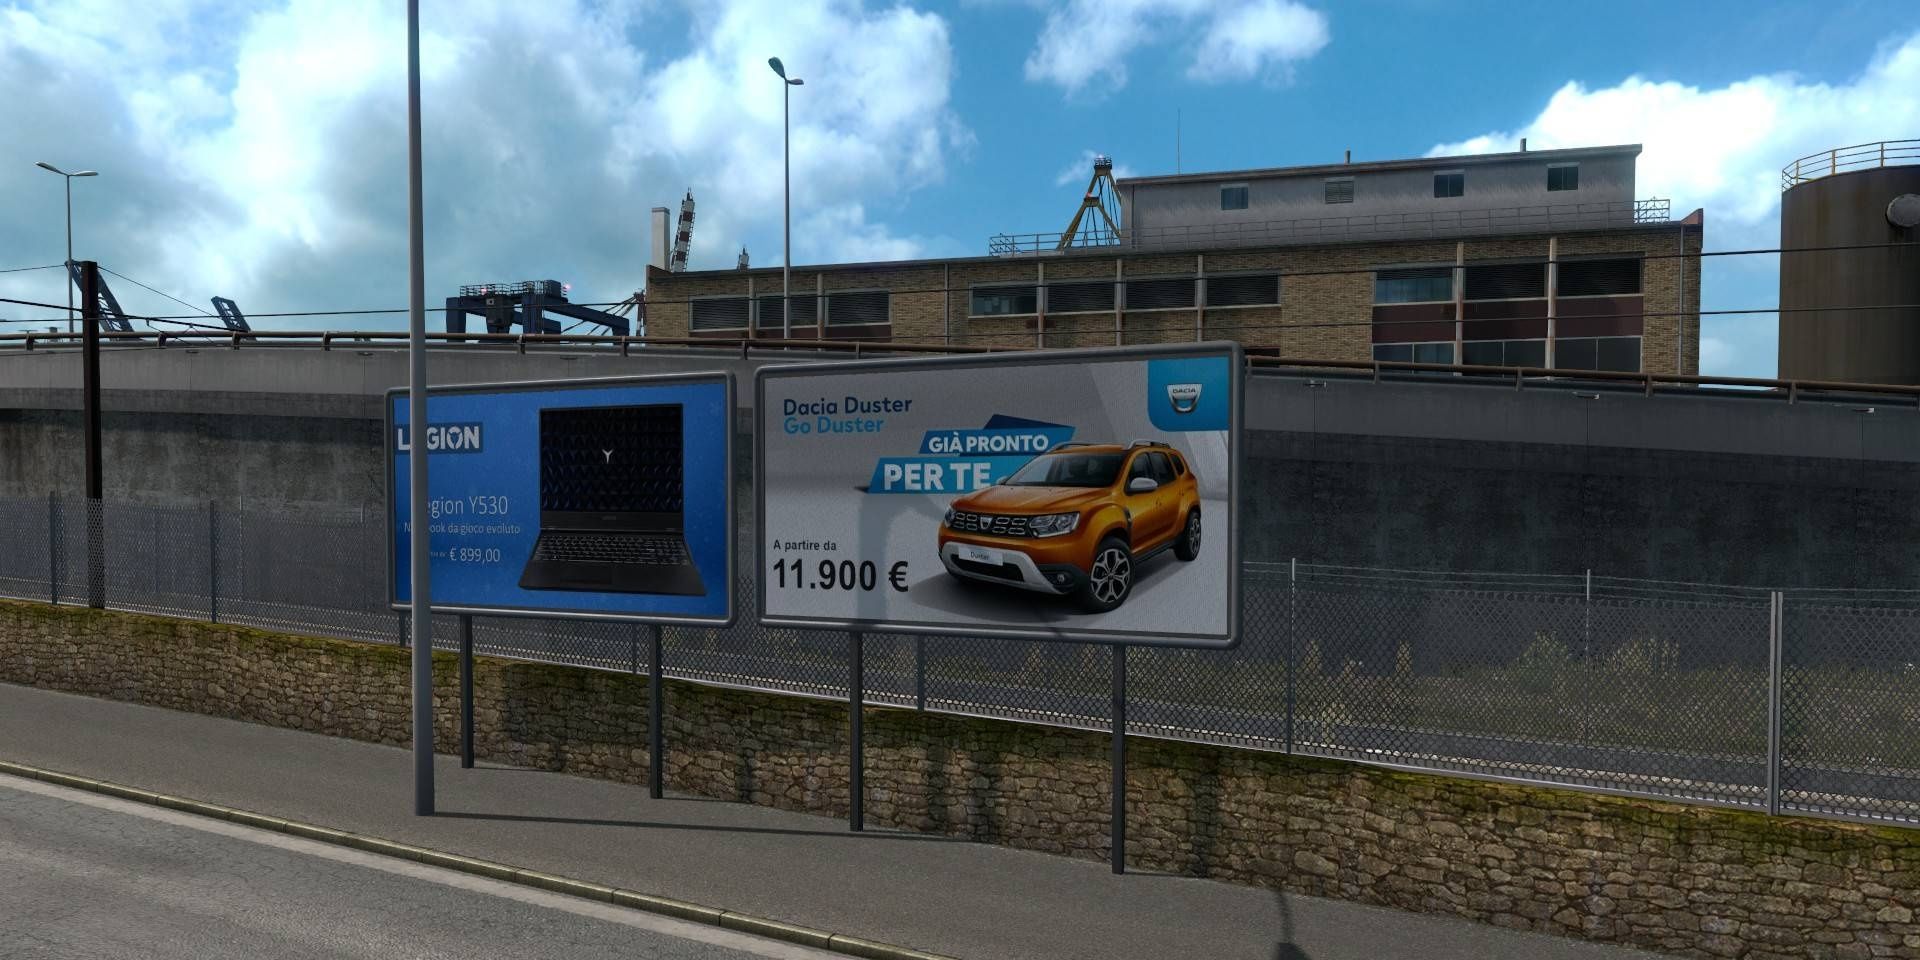 Real Advertisements Mod in Euro Truck Simulator 2